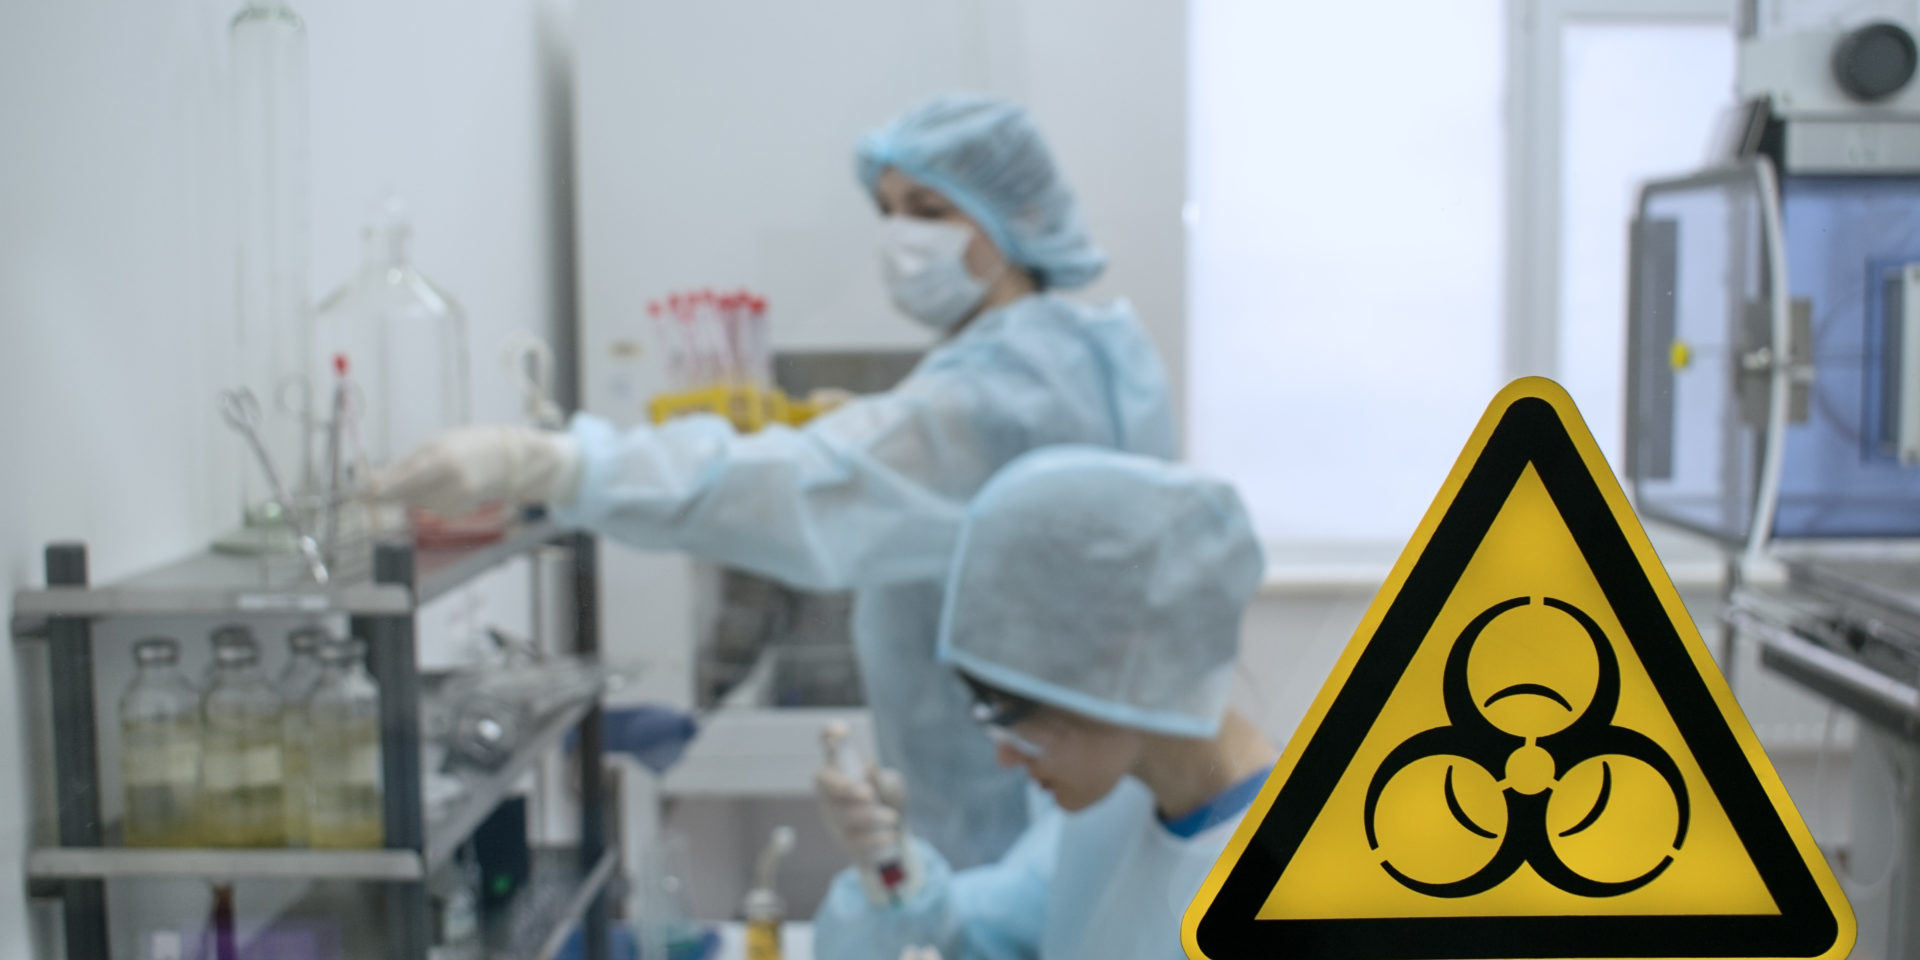 Biosafety Sign In A Sterile Laboratory